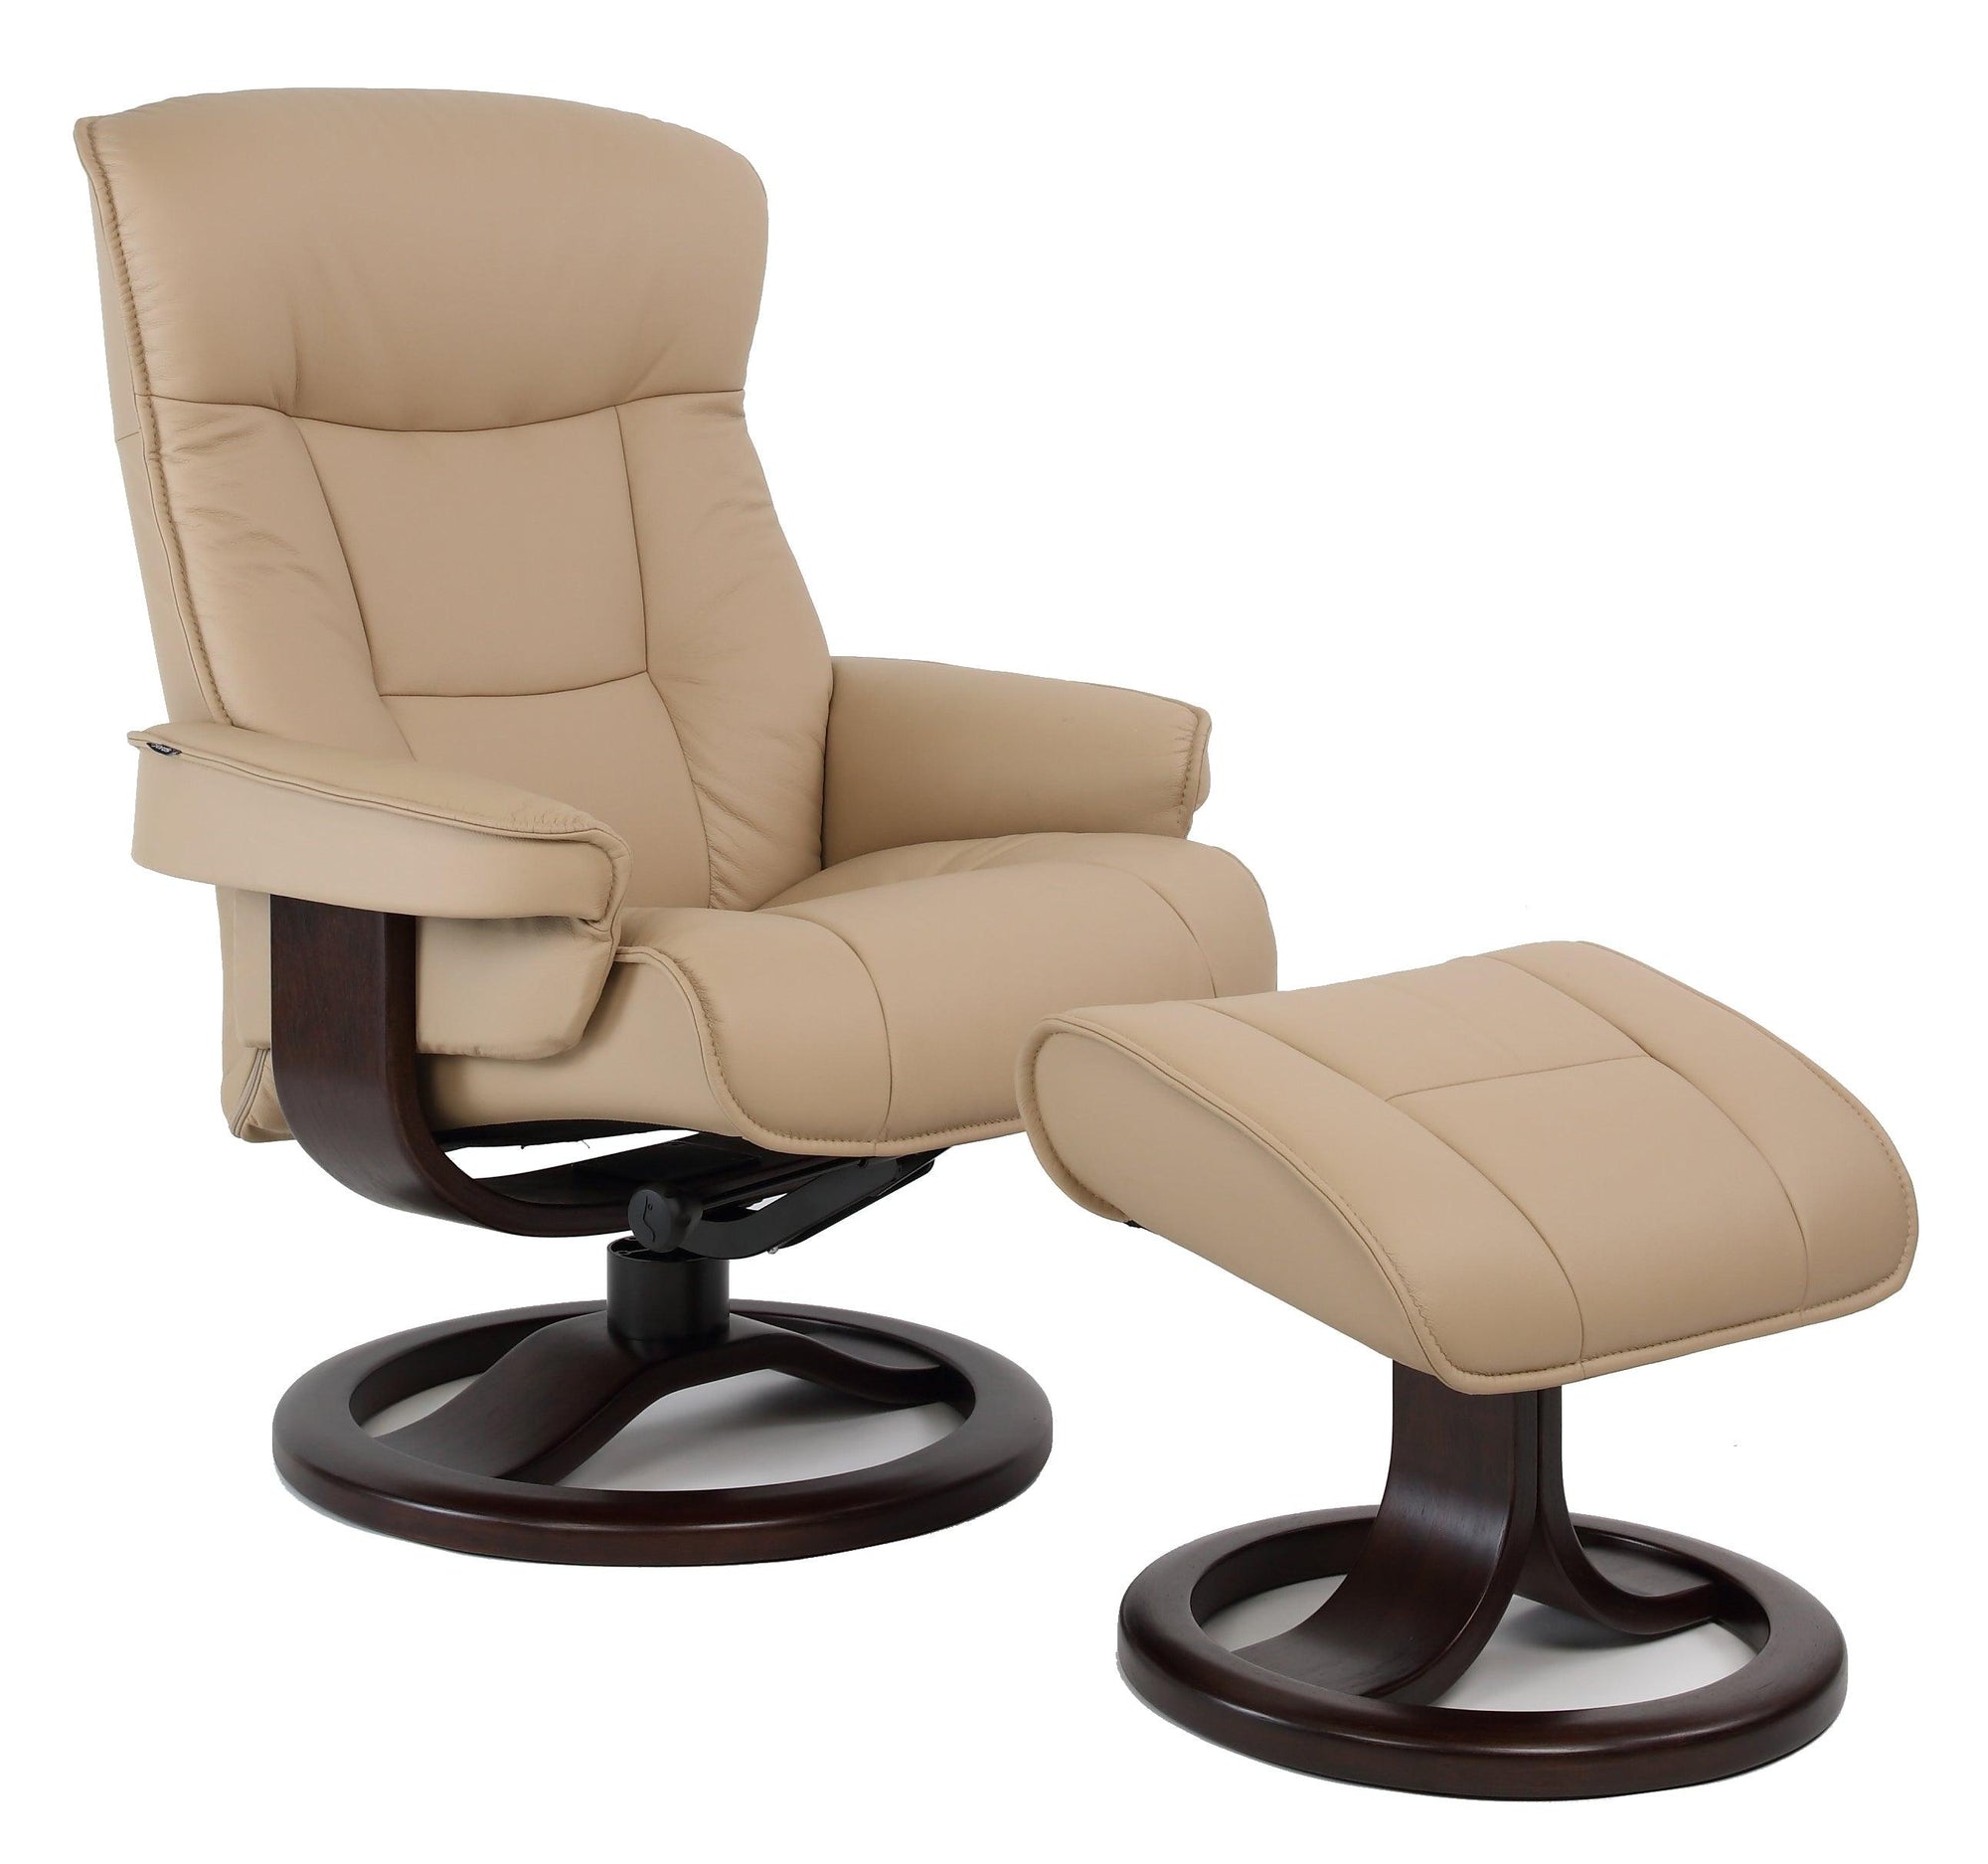 Mustang R Leather Reclining Living Chair - Furniture Euro